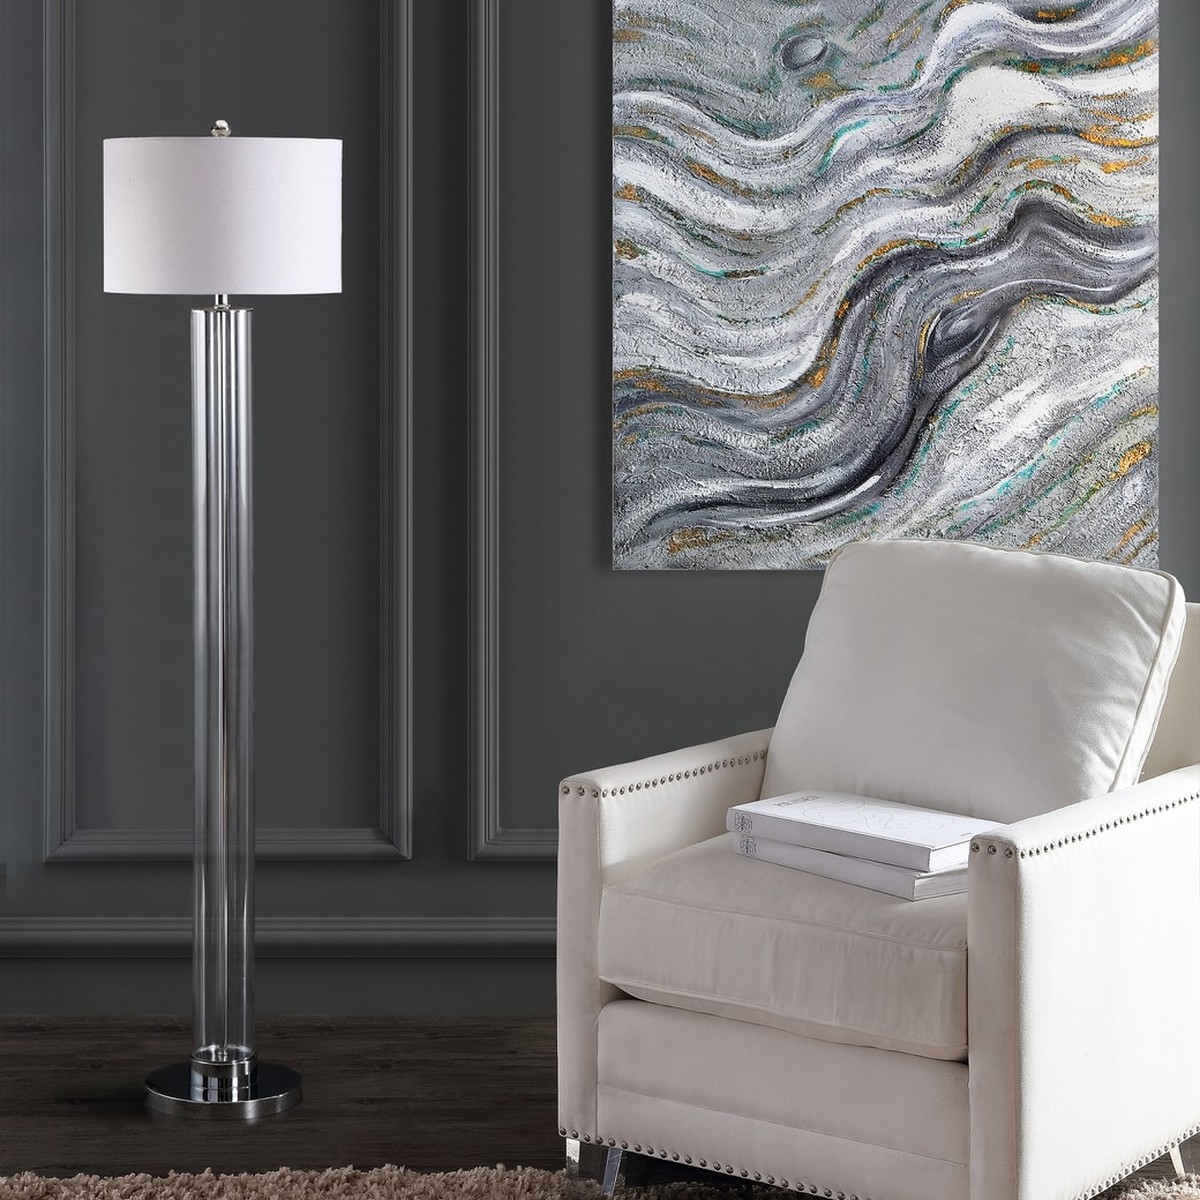 Lovato 64-Inch H Floor Lamp - Clear - Arlo Home - Image 2